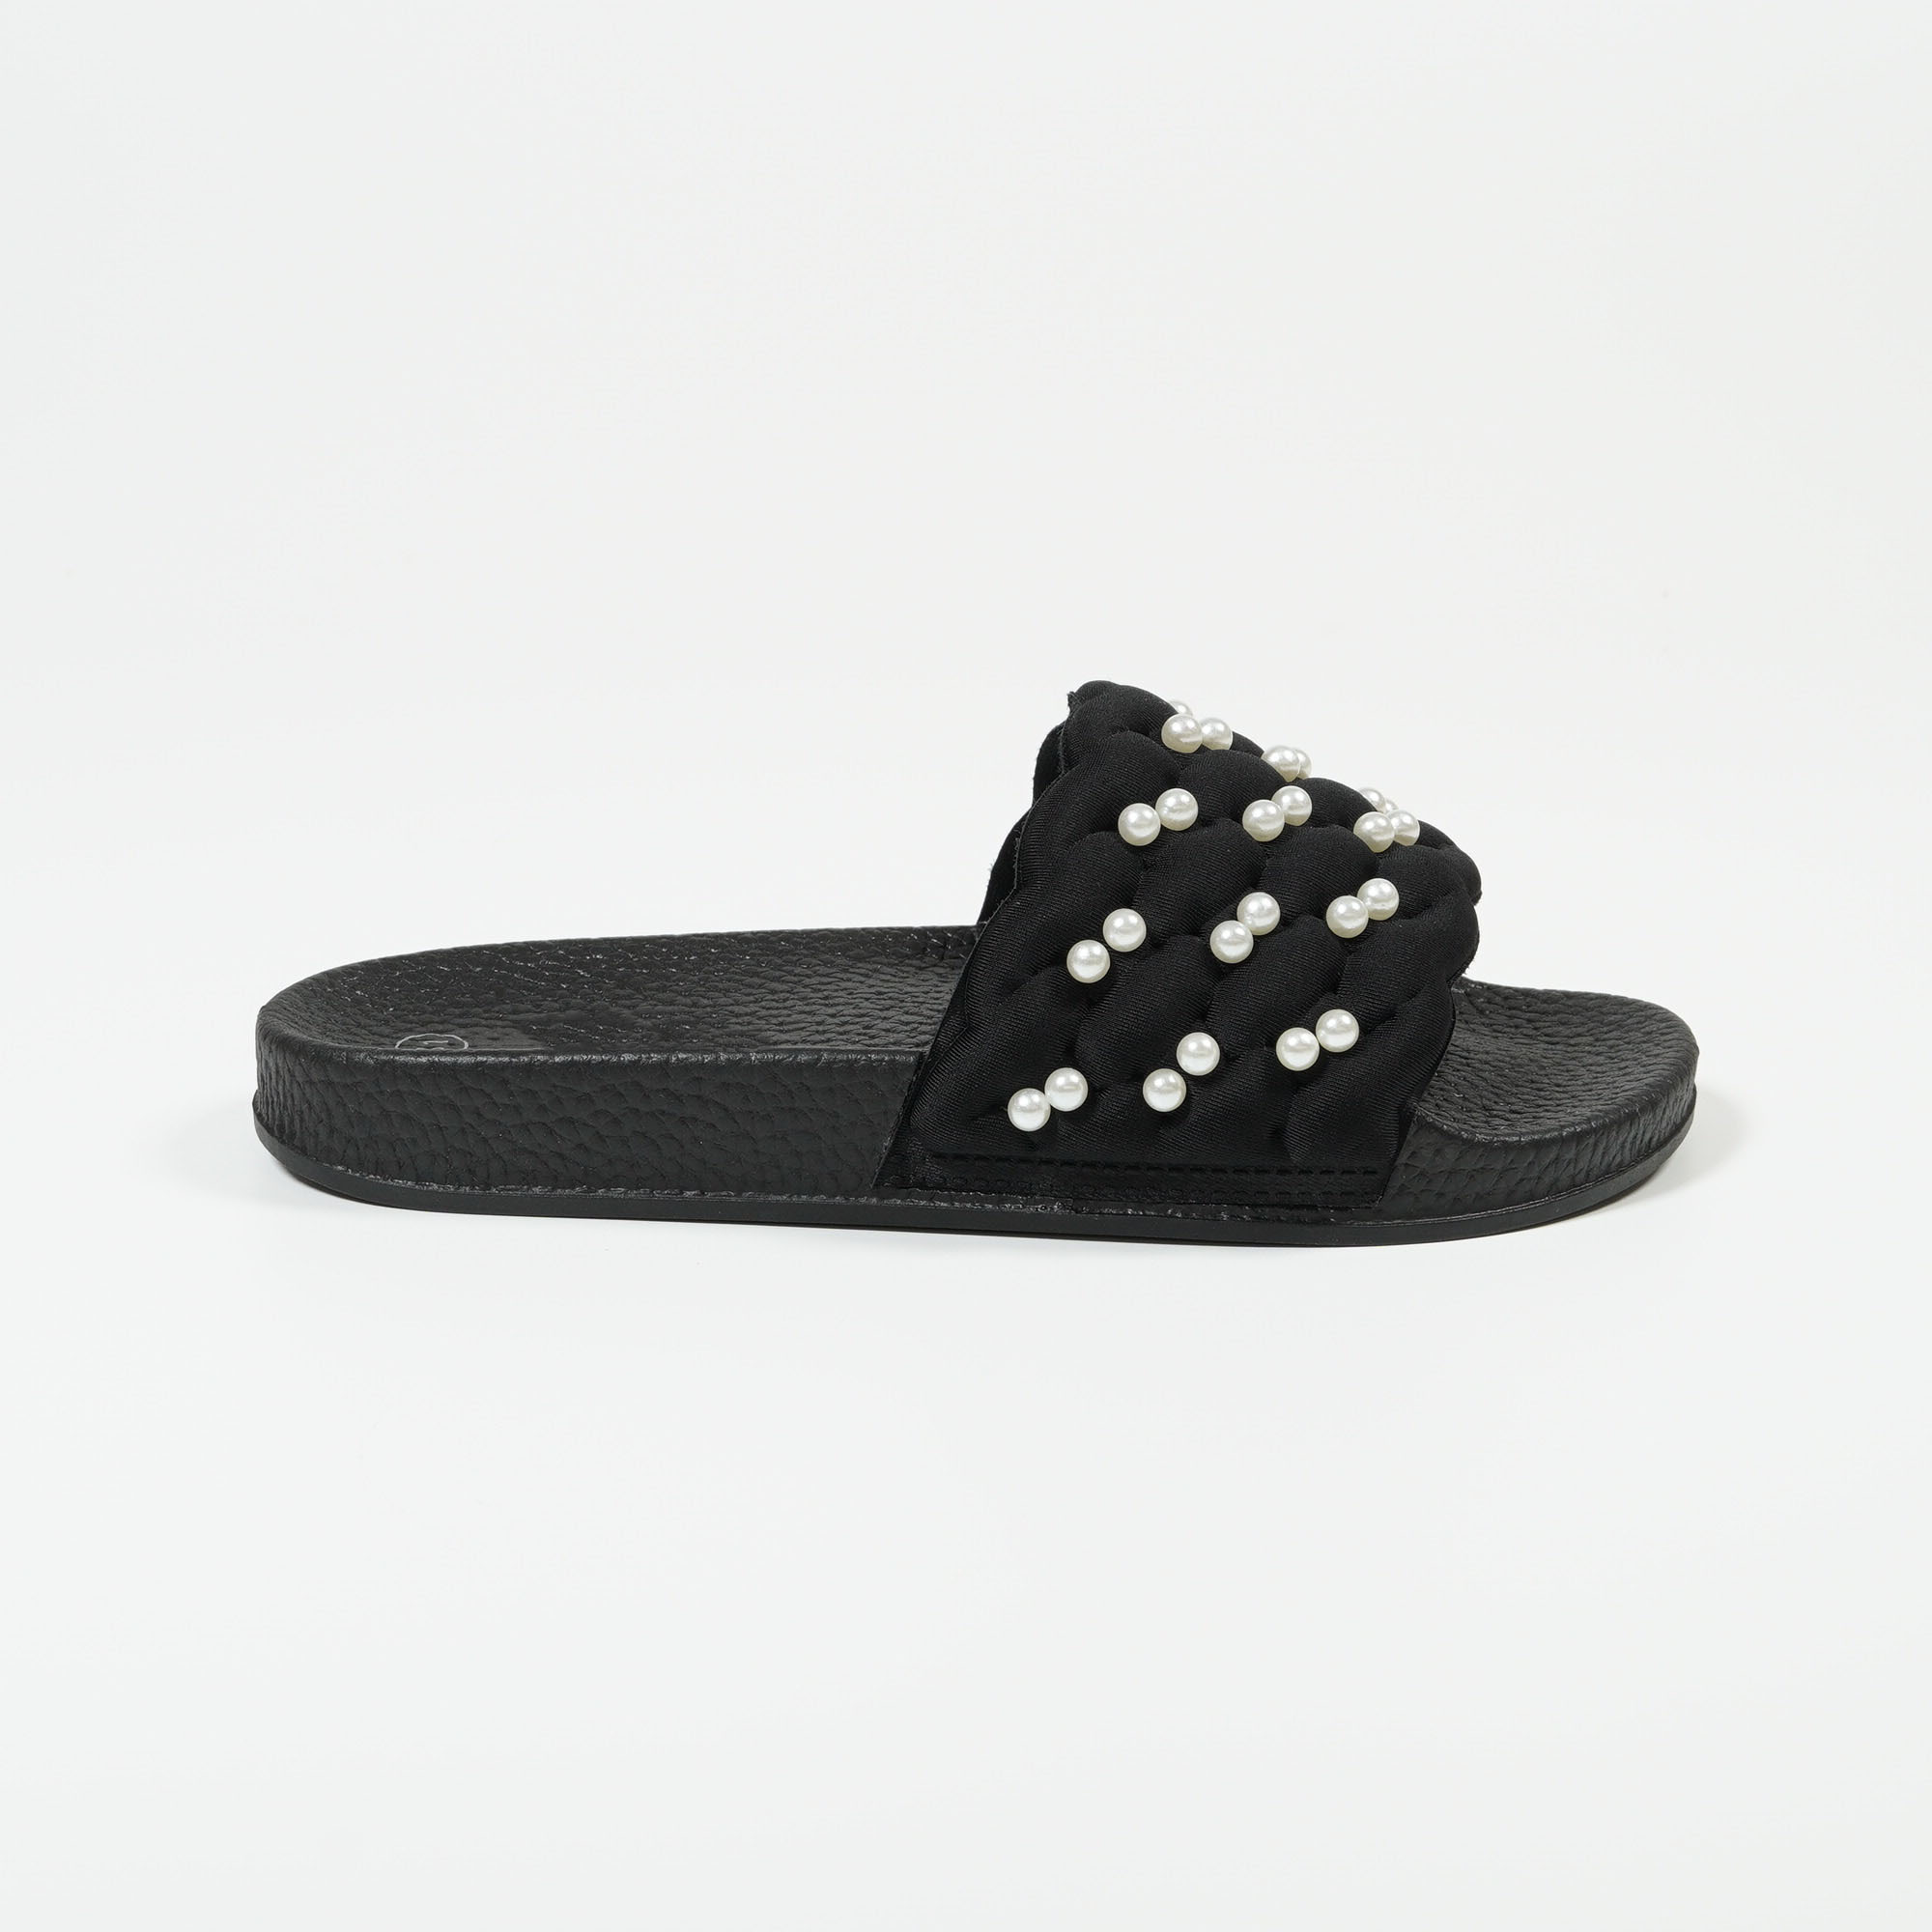 DELICATE AND ELEGANT FASHION CASUAL PEARL SPONGE PVC SLIPPERS STYLISH COMFORT SLIPPERS